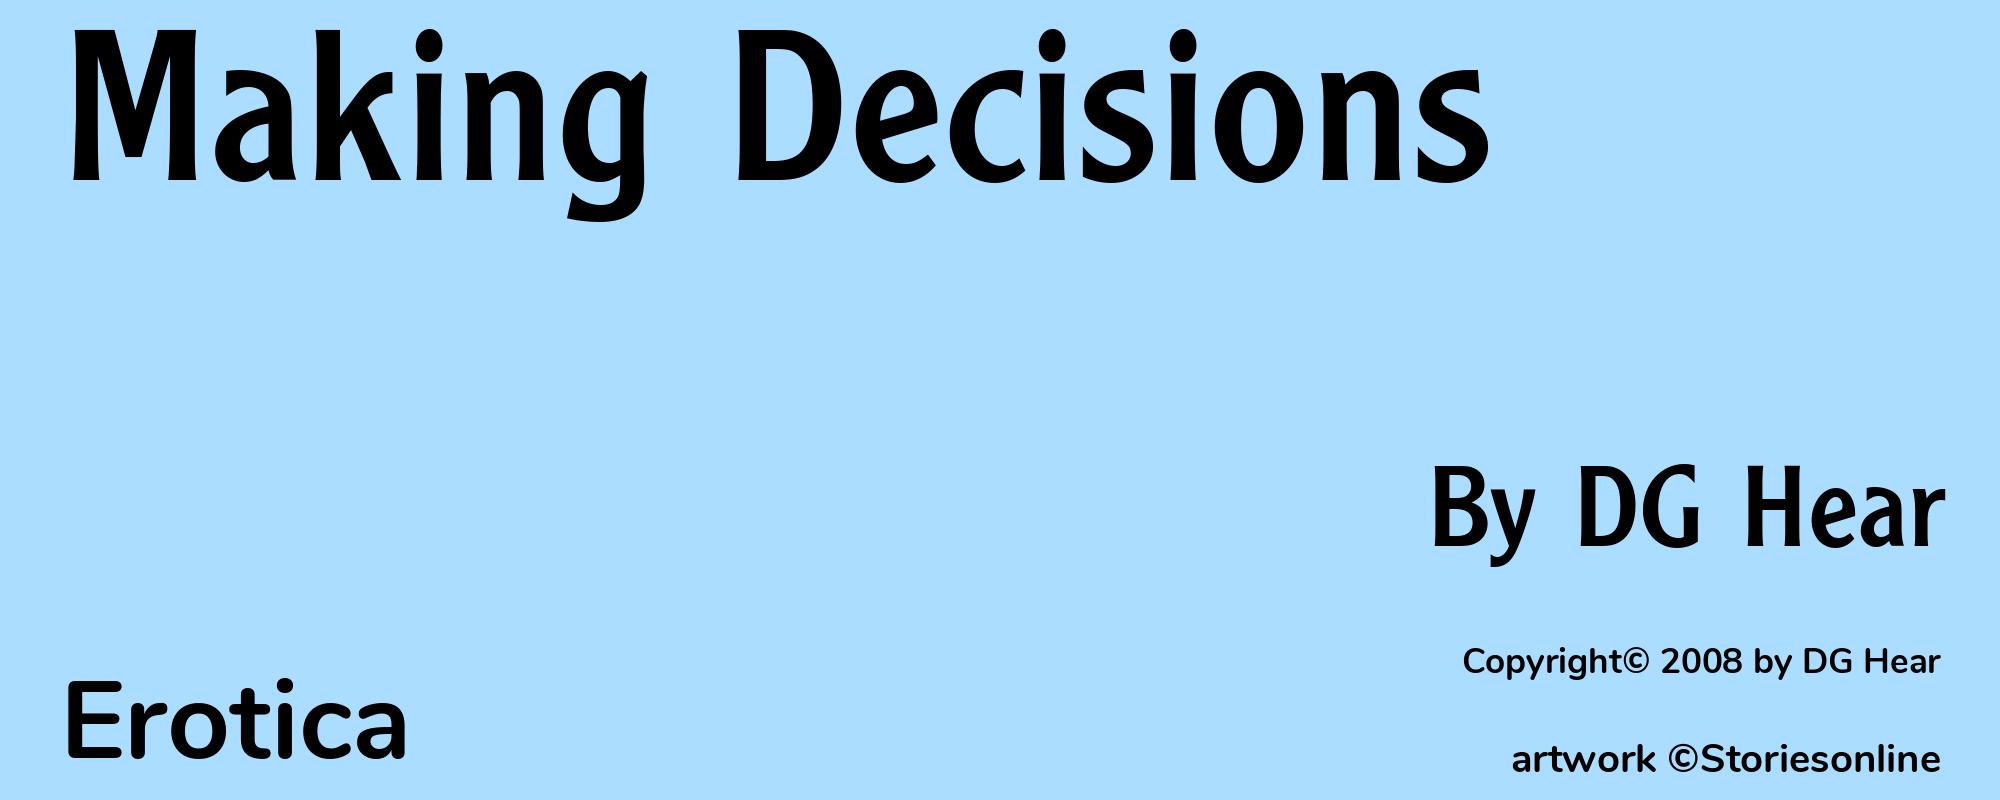 Making Decisions - Cover